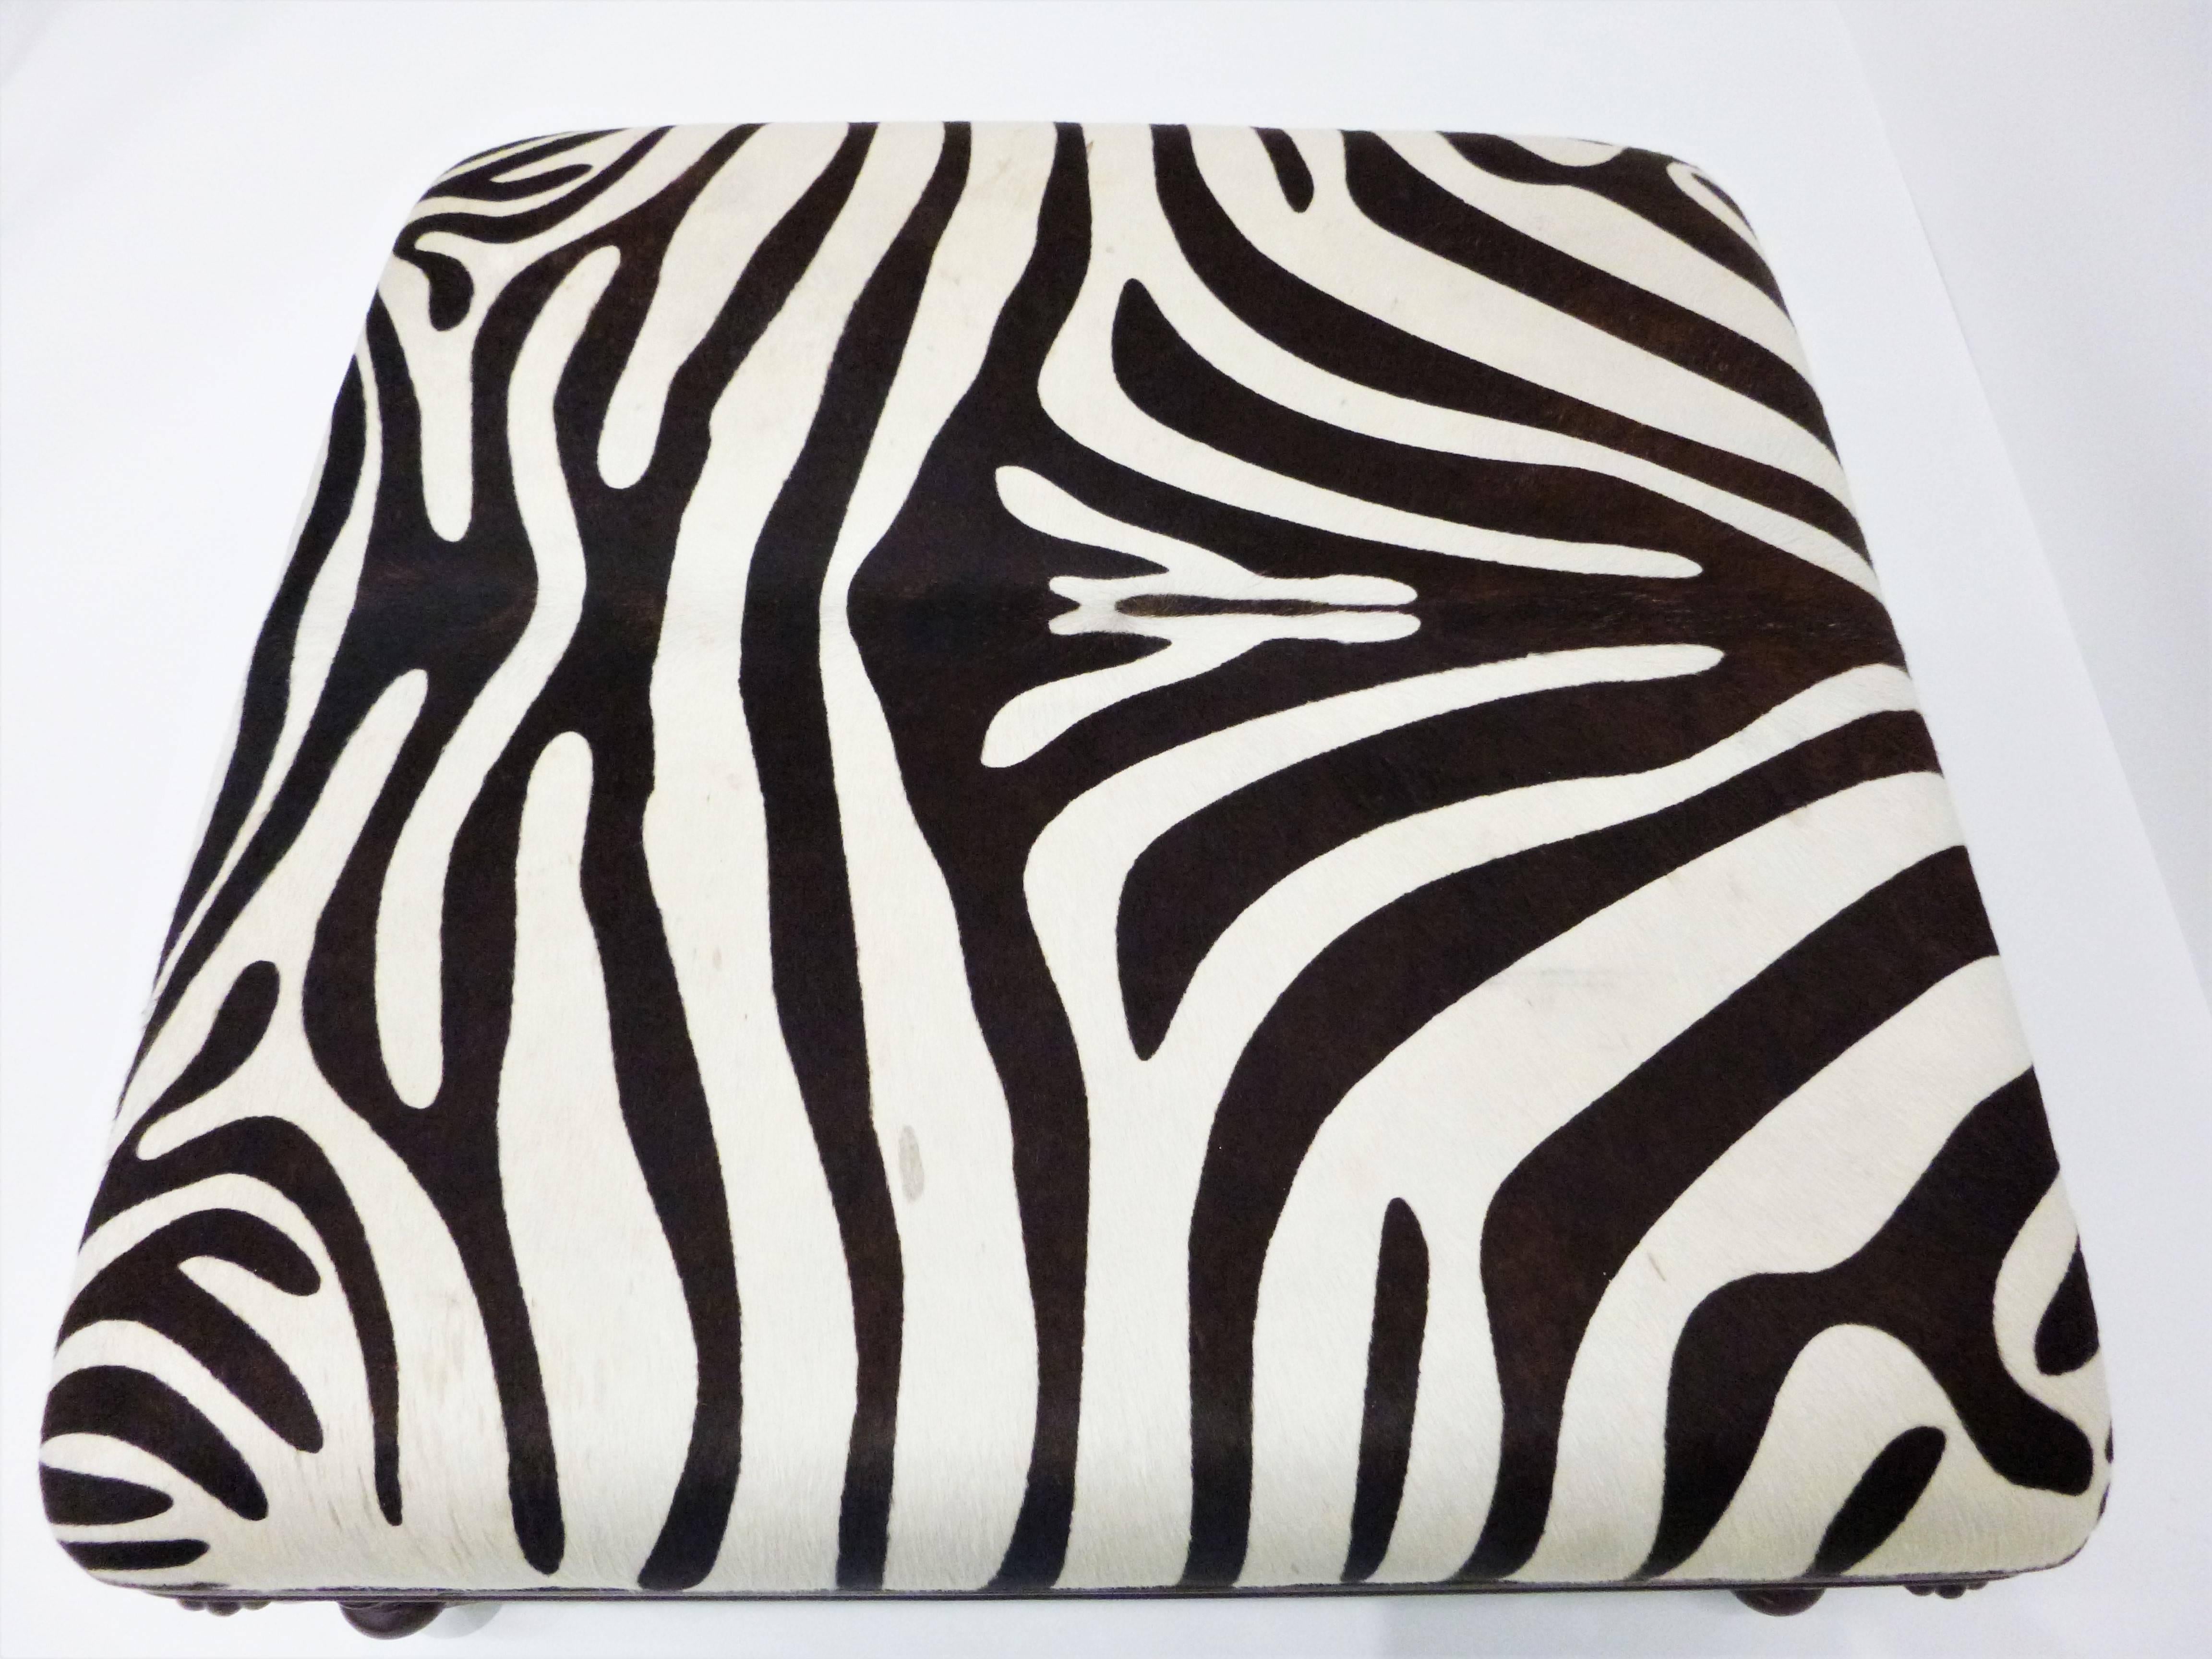 Vintage Zebra Hide Ottoman, Coffee or Cocktail Table In Excellent Condition For Sale In Dallas, TX